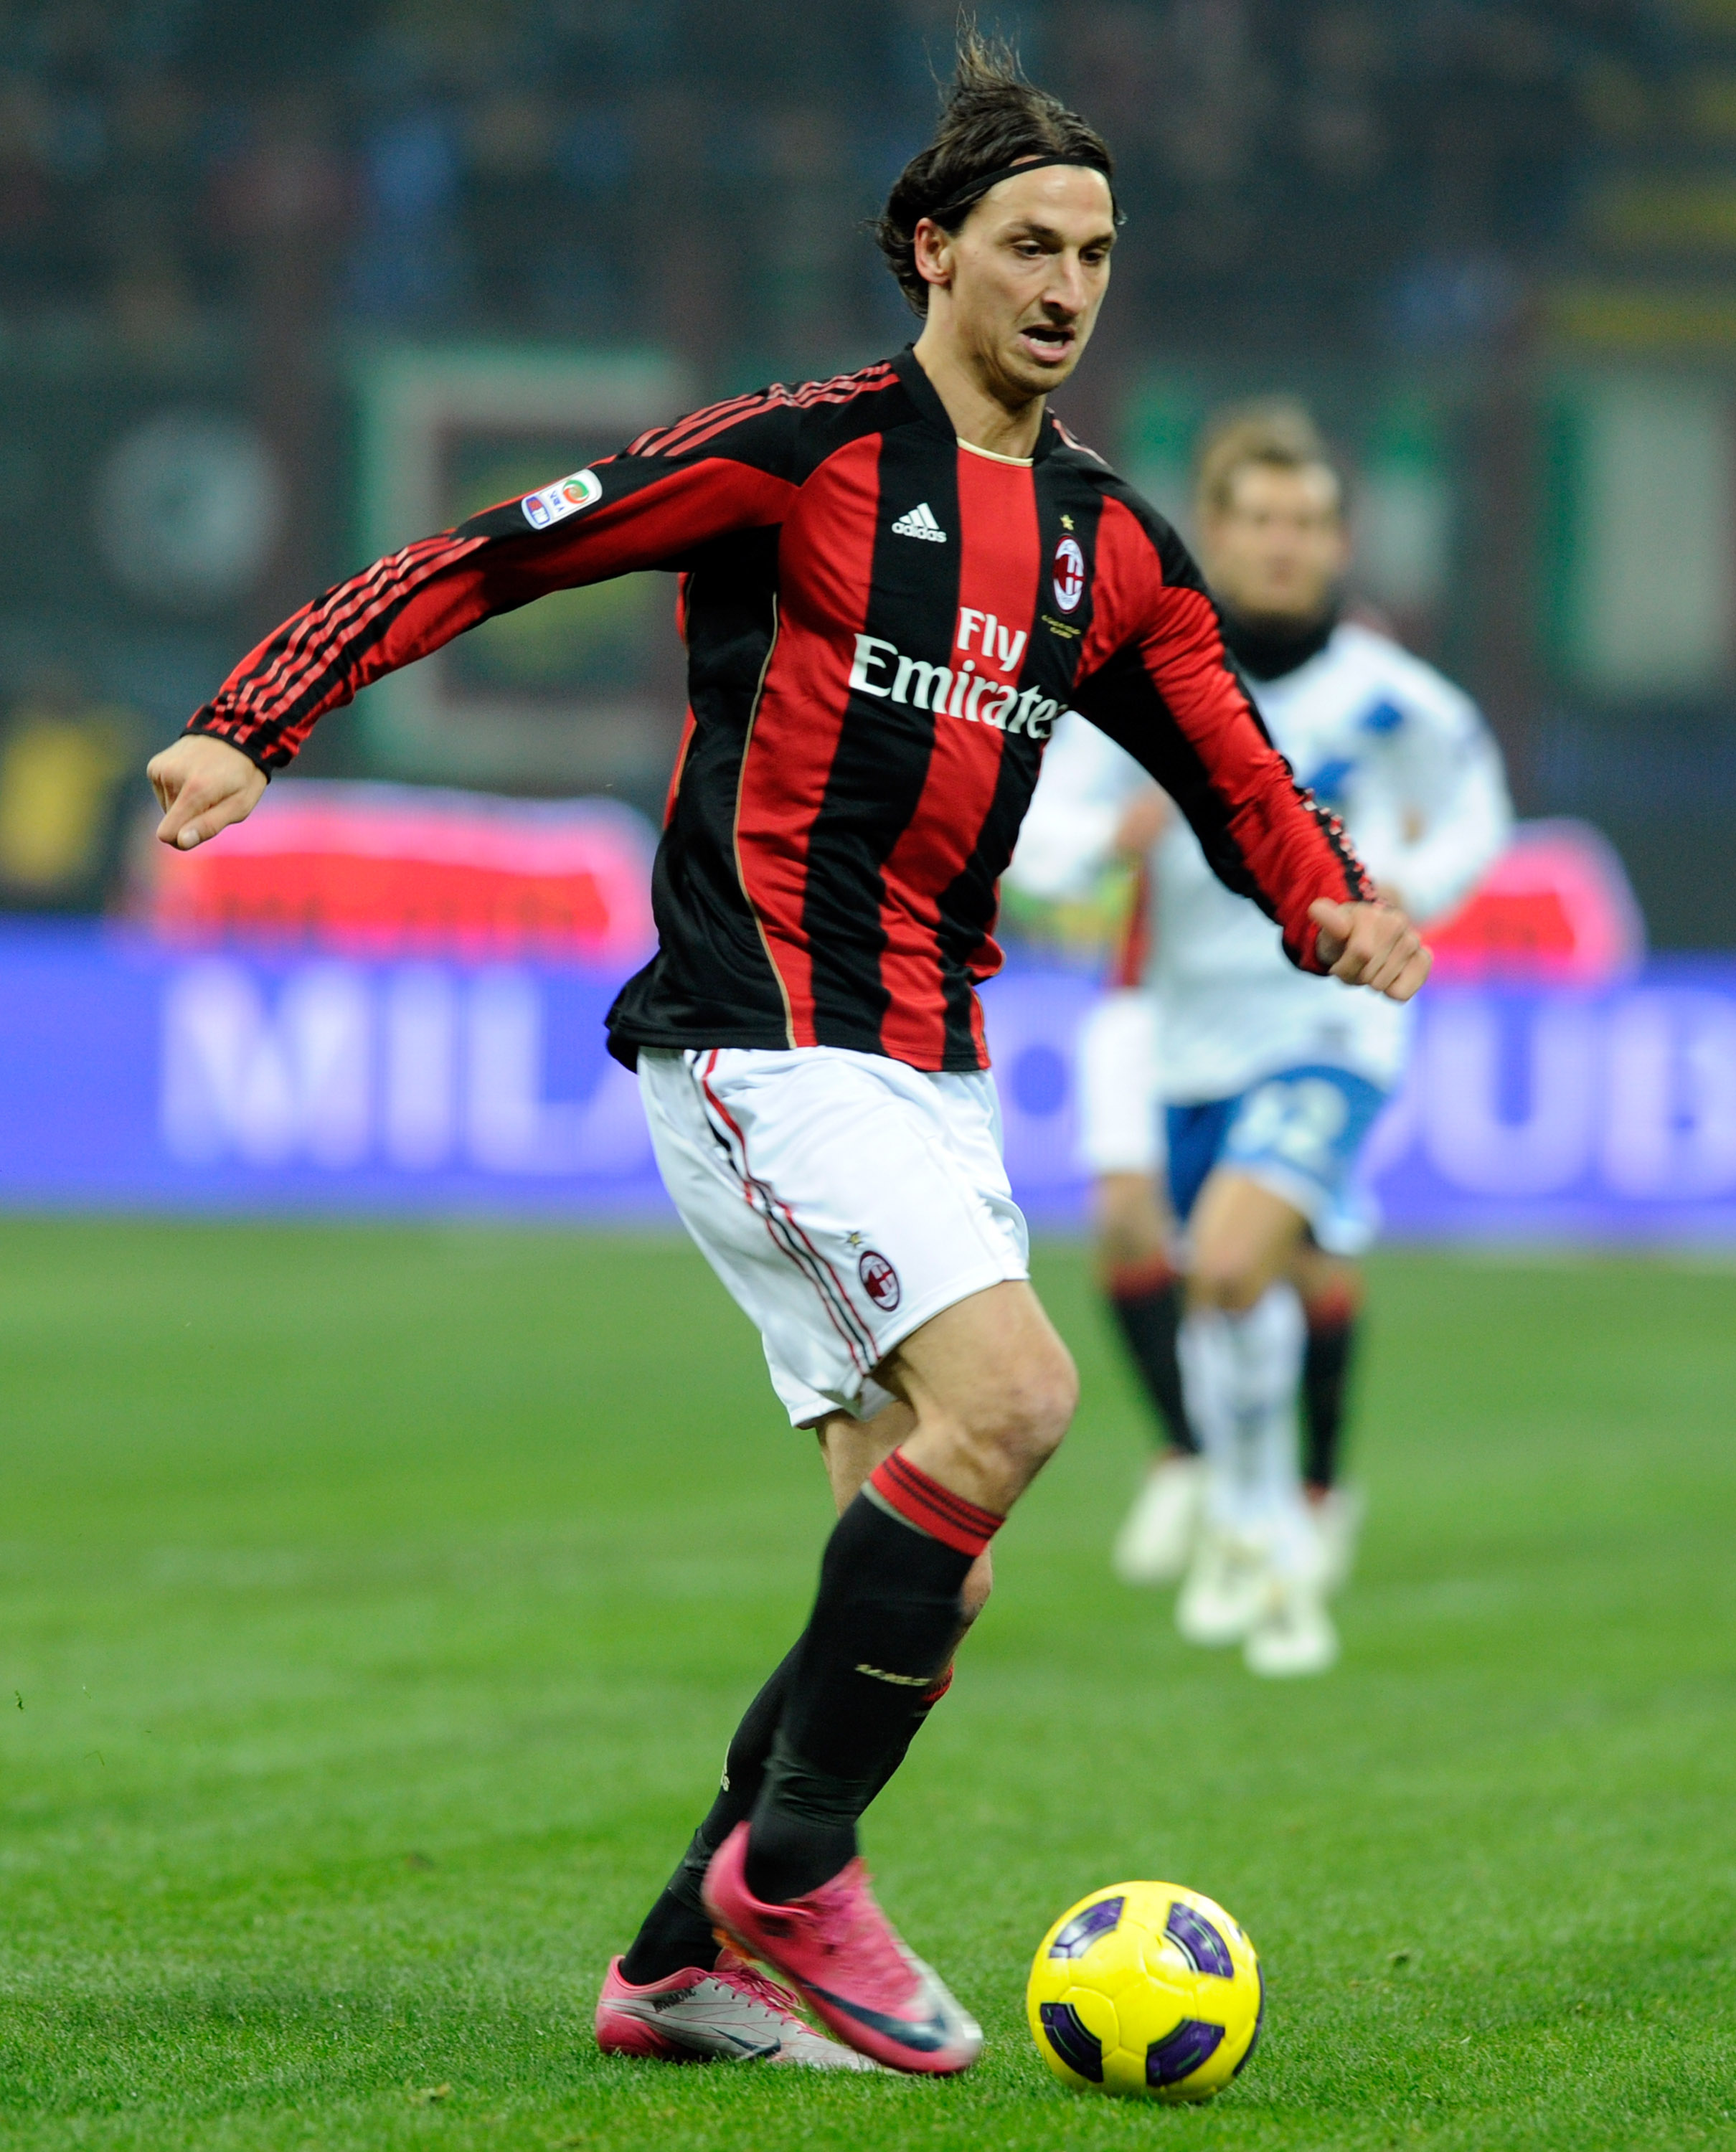 MILAN, ITALY - DECEMBER 04:  Zlatan Ibrahimovic of AC Milan runs during the Serie A match between Milan and Brescia at Stadio Giuseppe Meazza on December 4, 2010 in Milan, Italy.  (Photo by Claudio Villa/Getty Images)